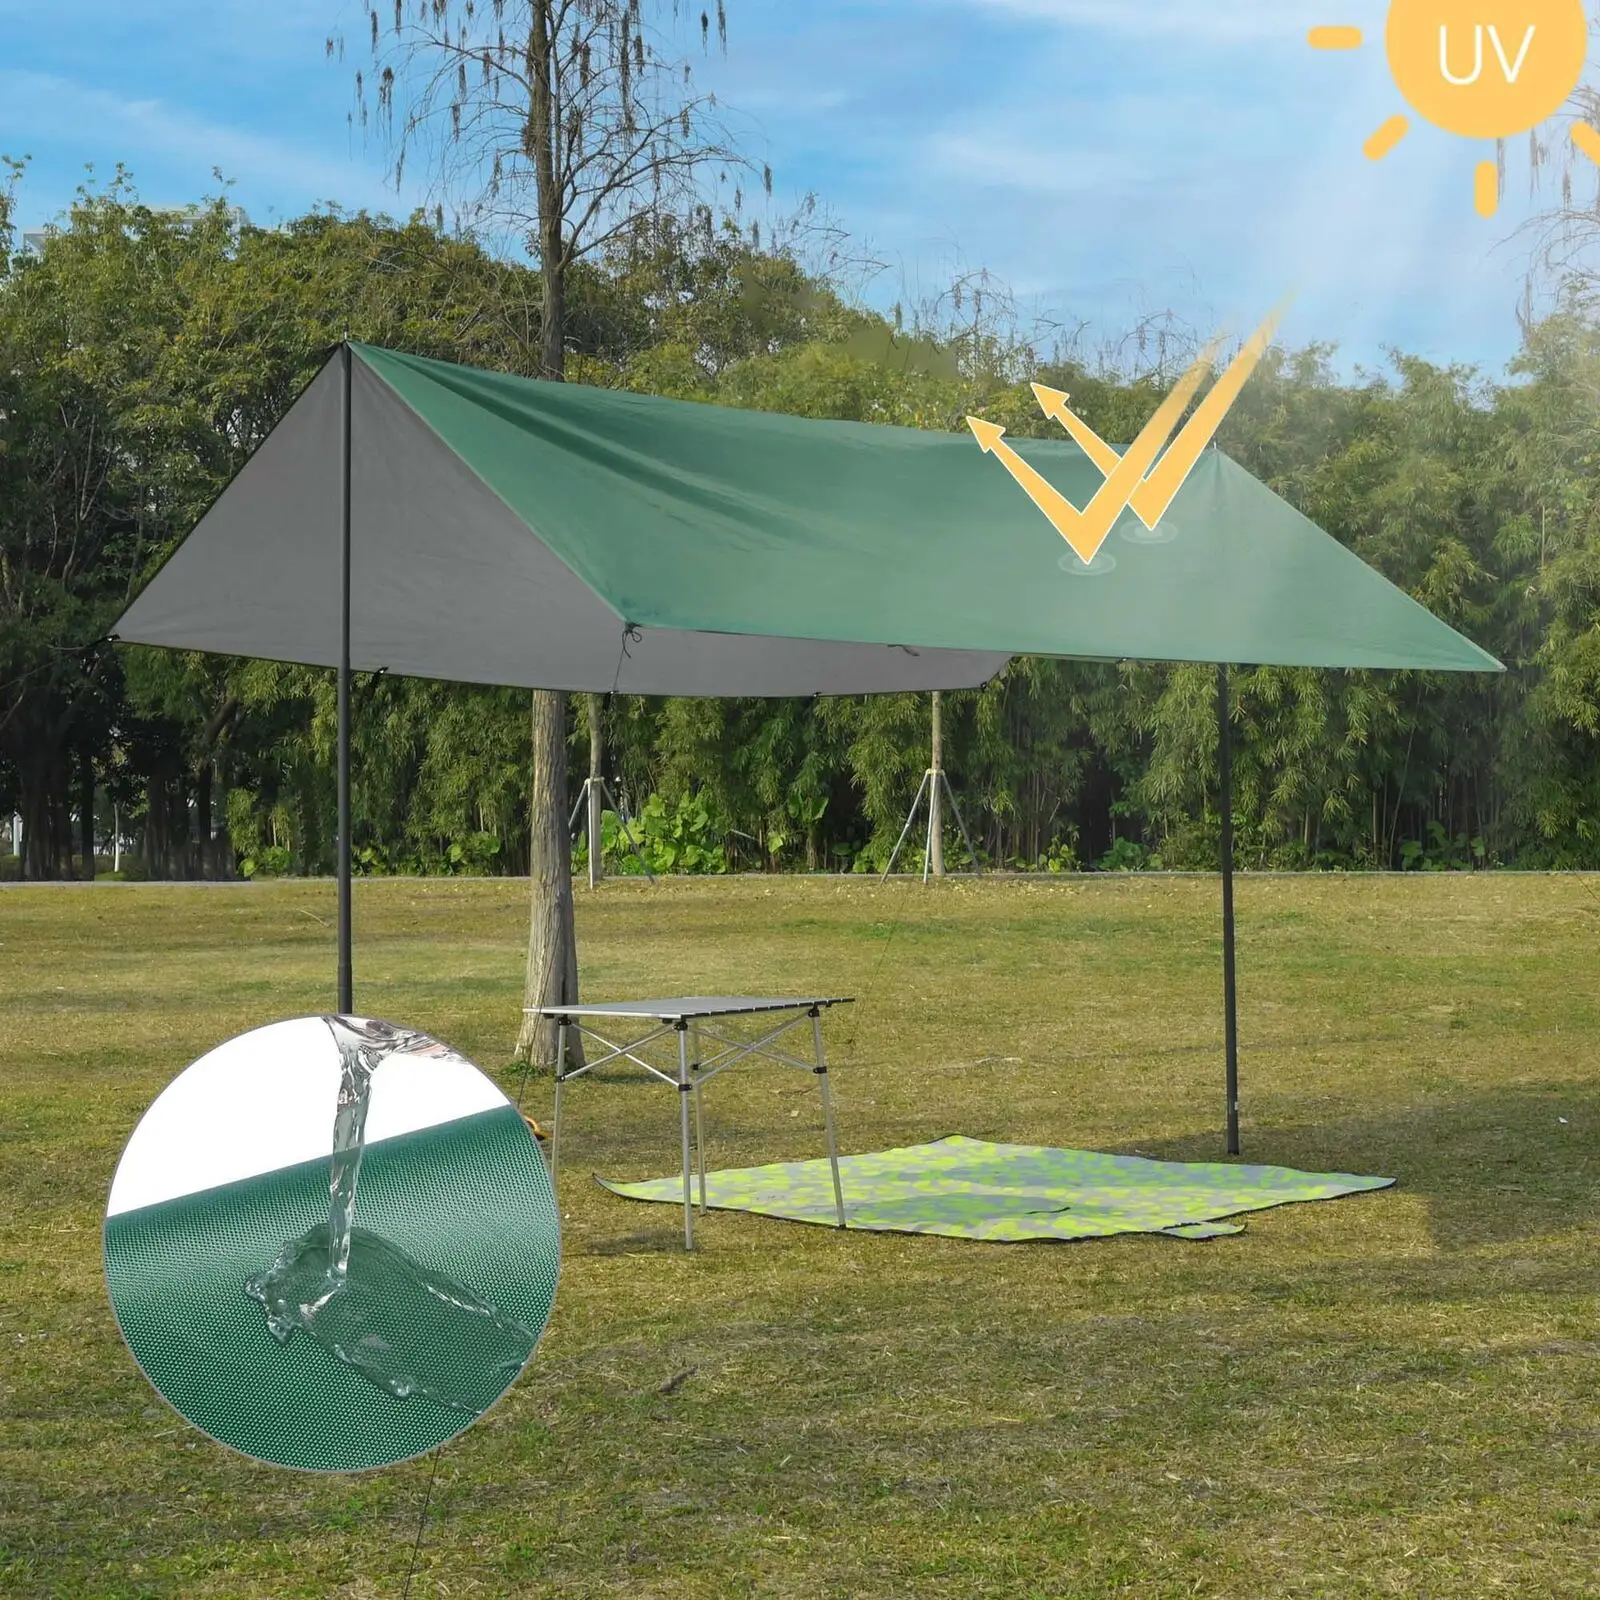 UV50+ Protection Water Resistance Camping Tent Tarp Green 295 X 398.5 Cm